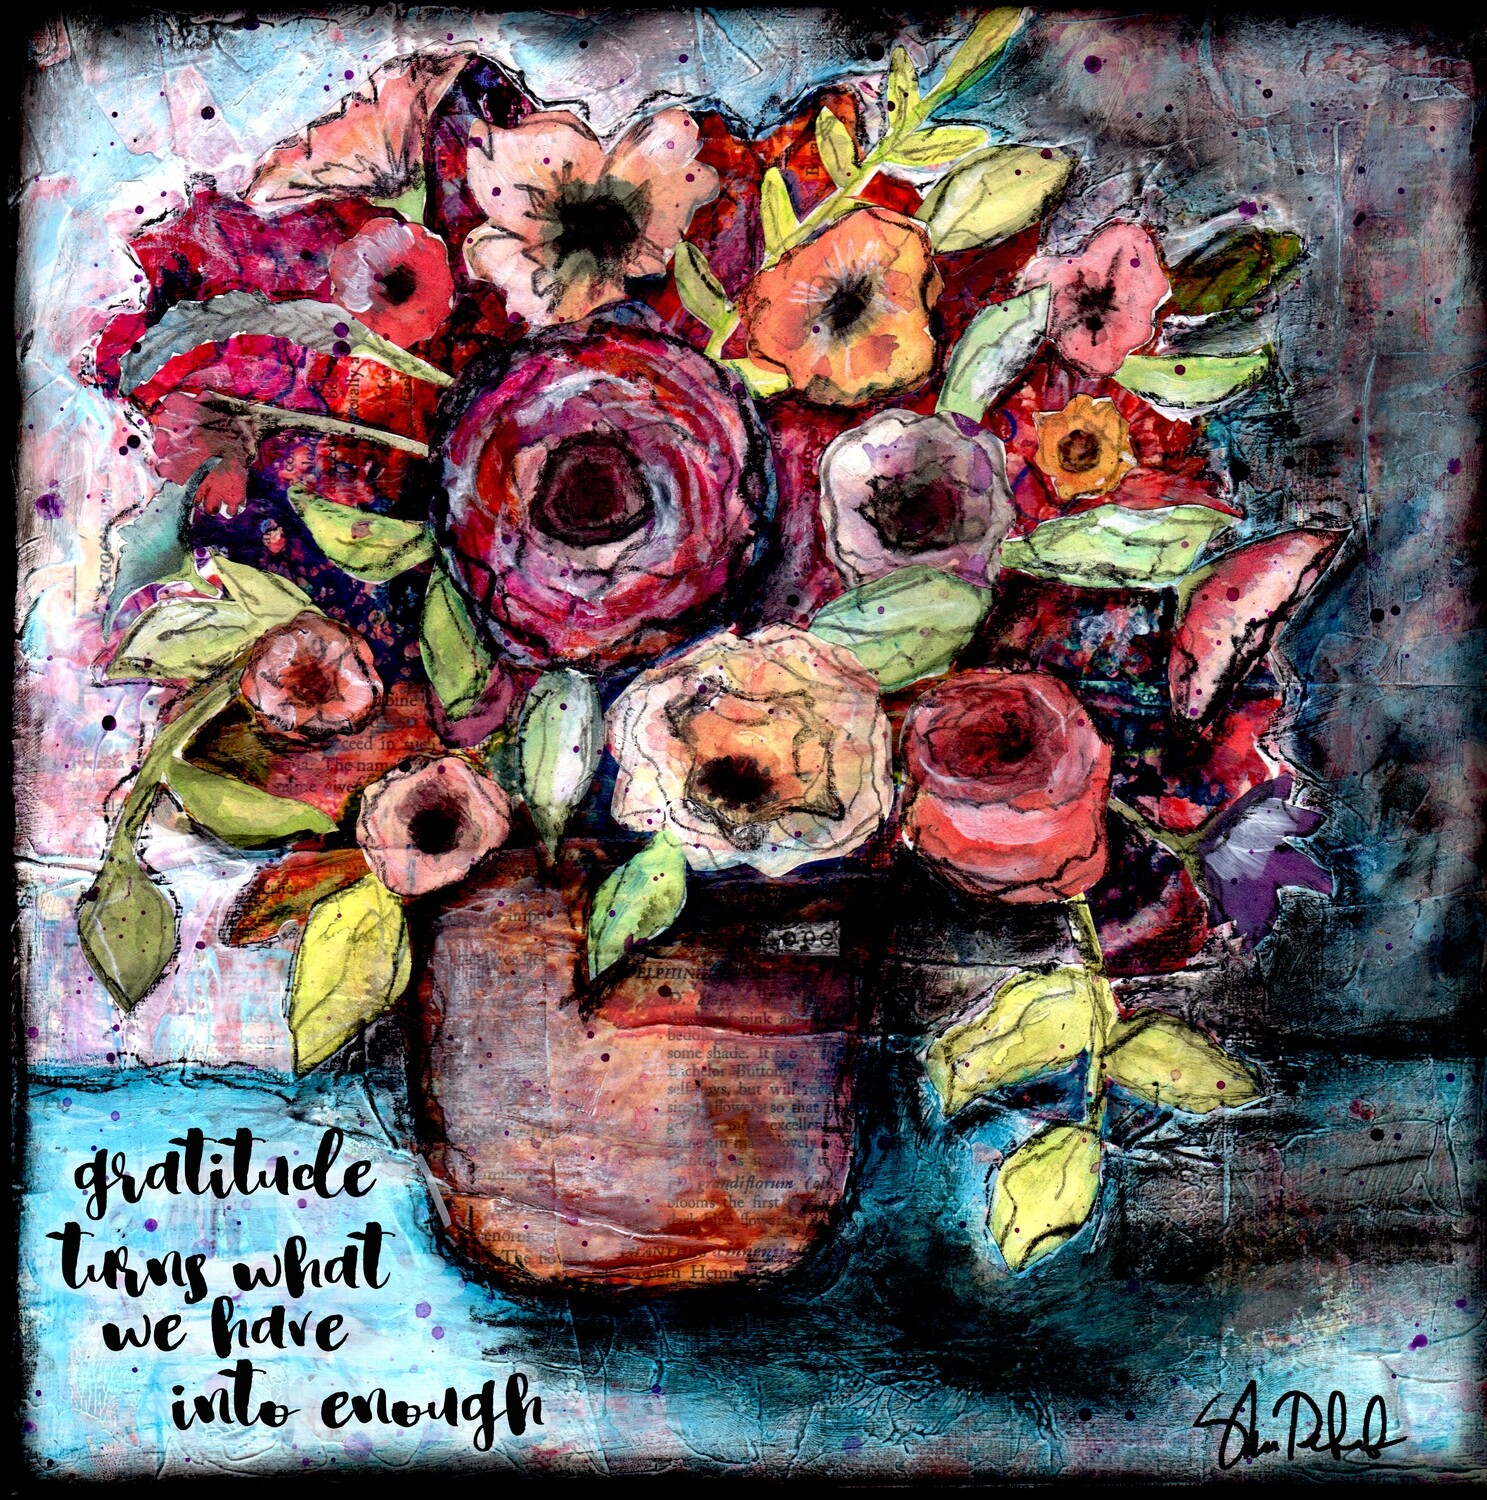 "Gratitude turns what we have into enough" Print on Wood 6x6 Overstock